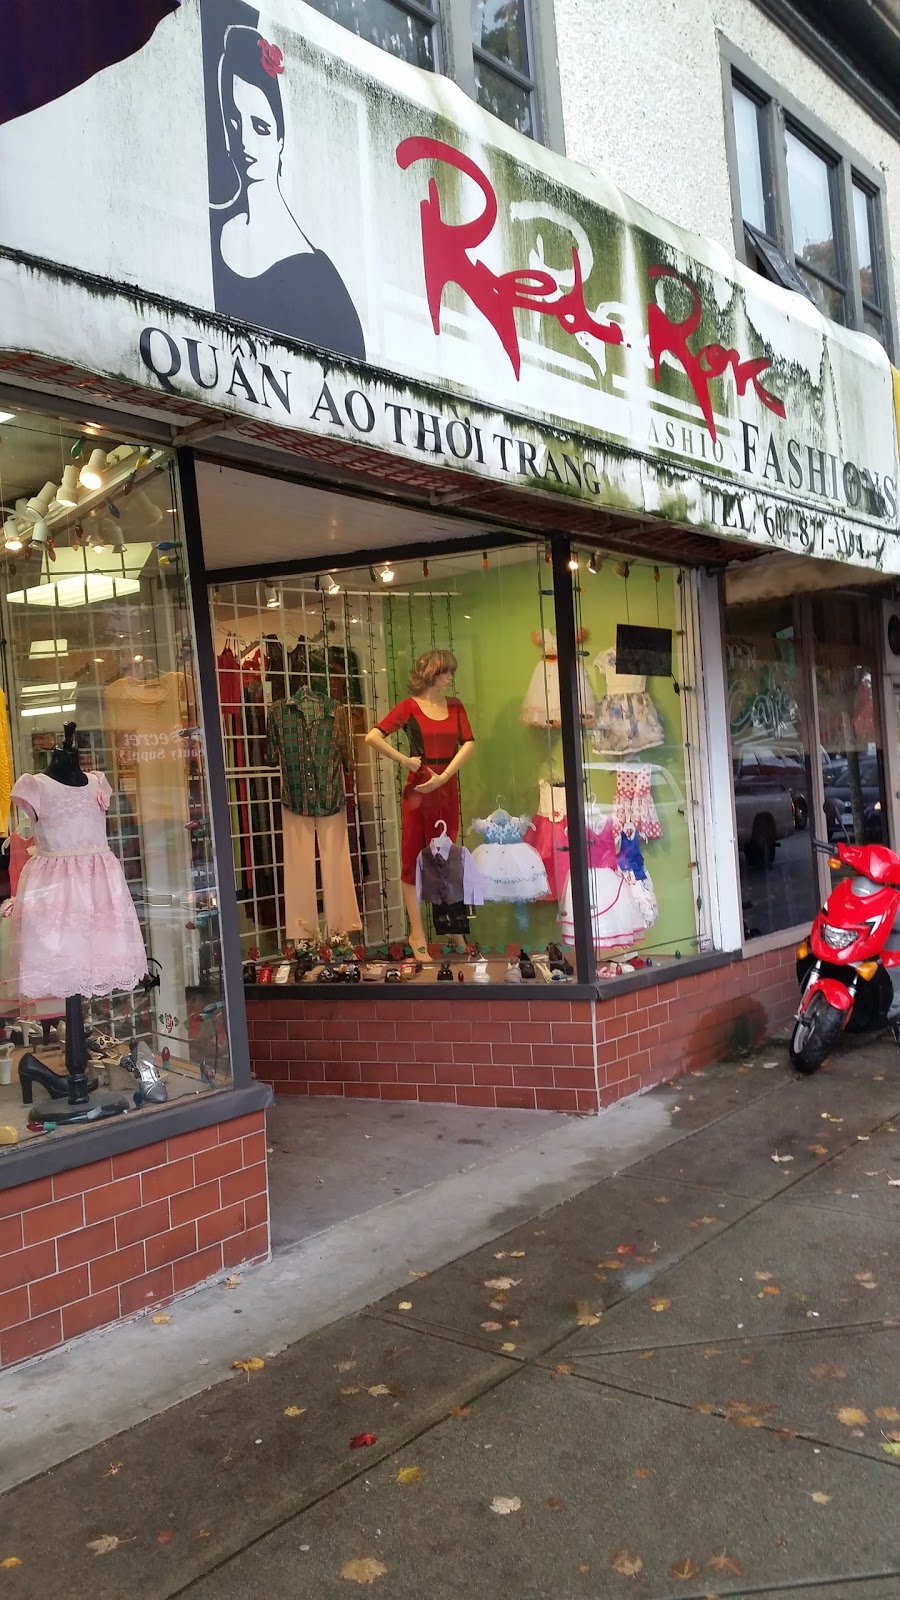 Red Roses Boutique | 1332 Kingsway, Vancouver, BC V5V 3E4, Canada | Phone: (604) 877-1194